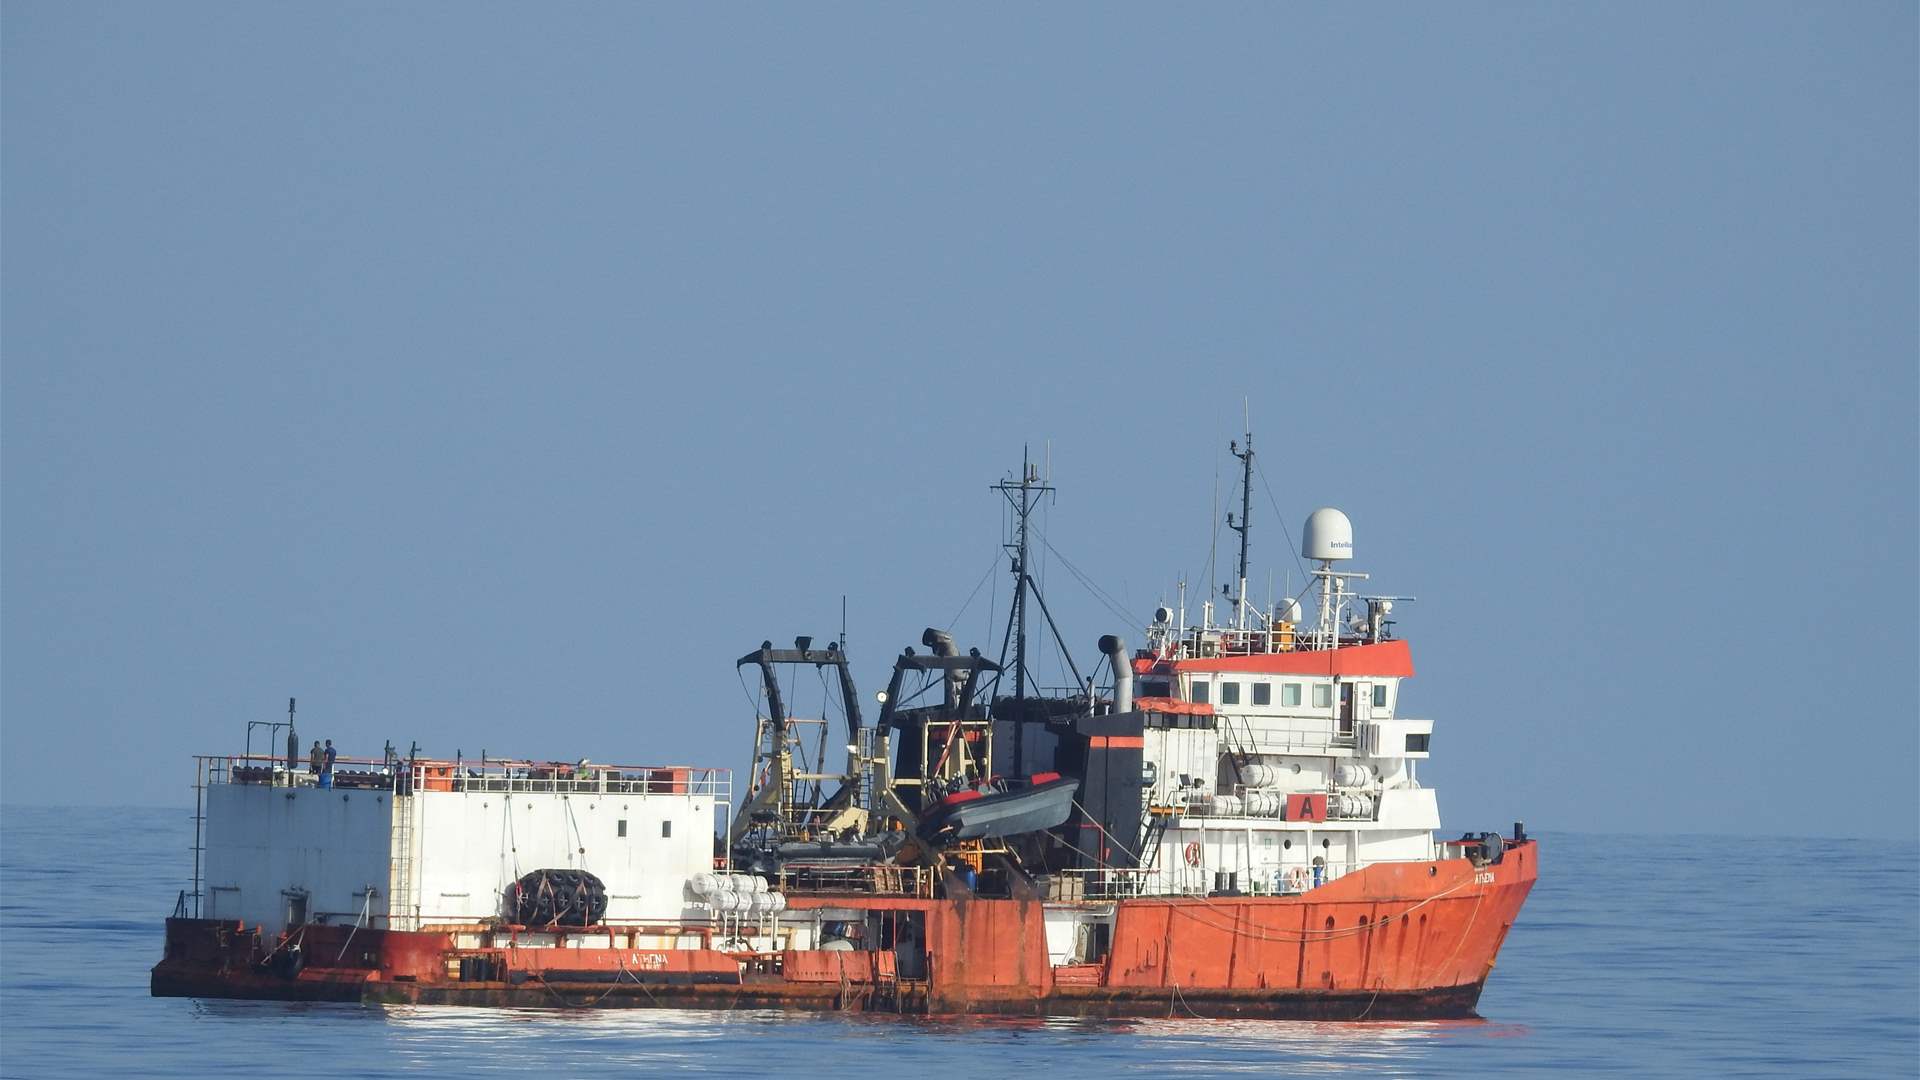 Israel-affiliated merchant vessel hit by aerial vehicle off India